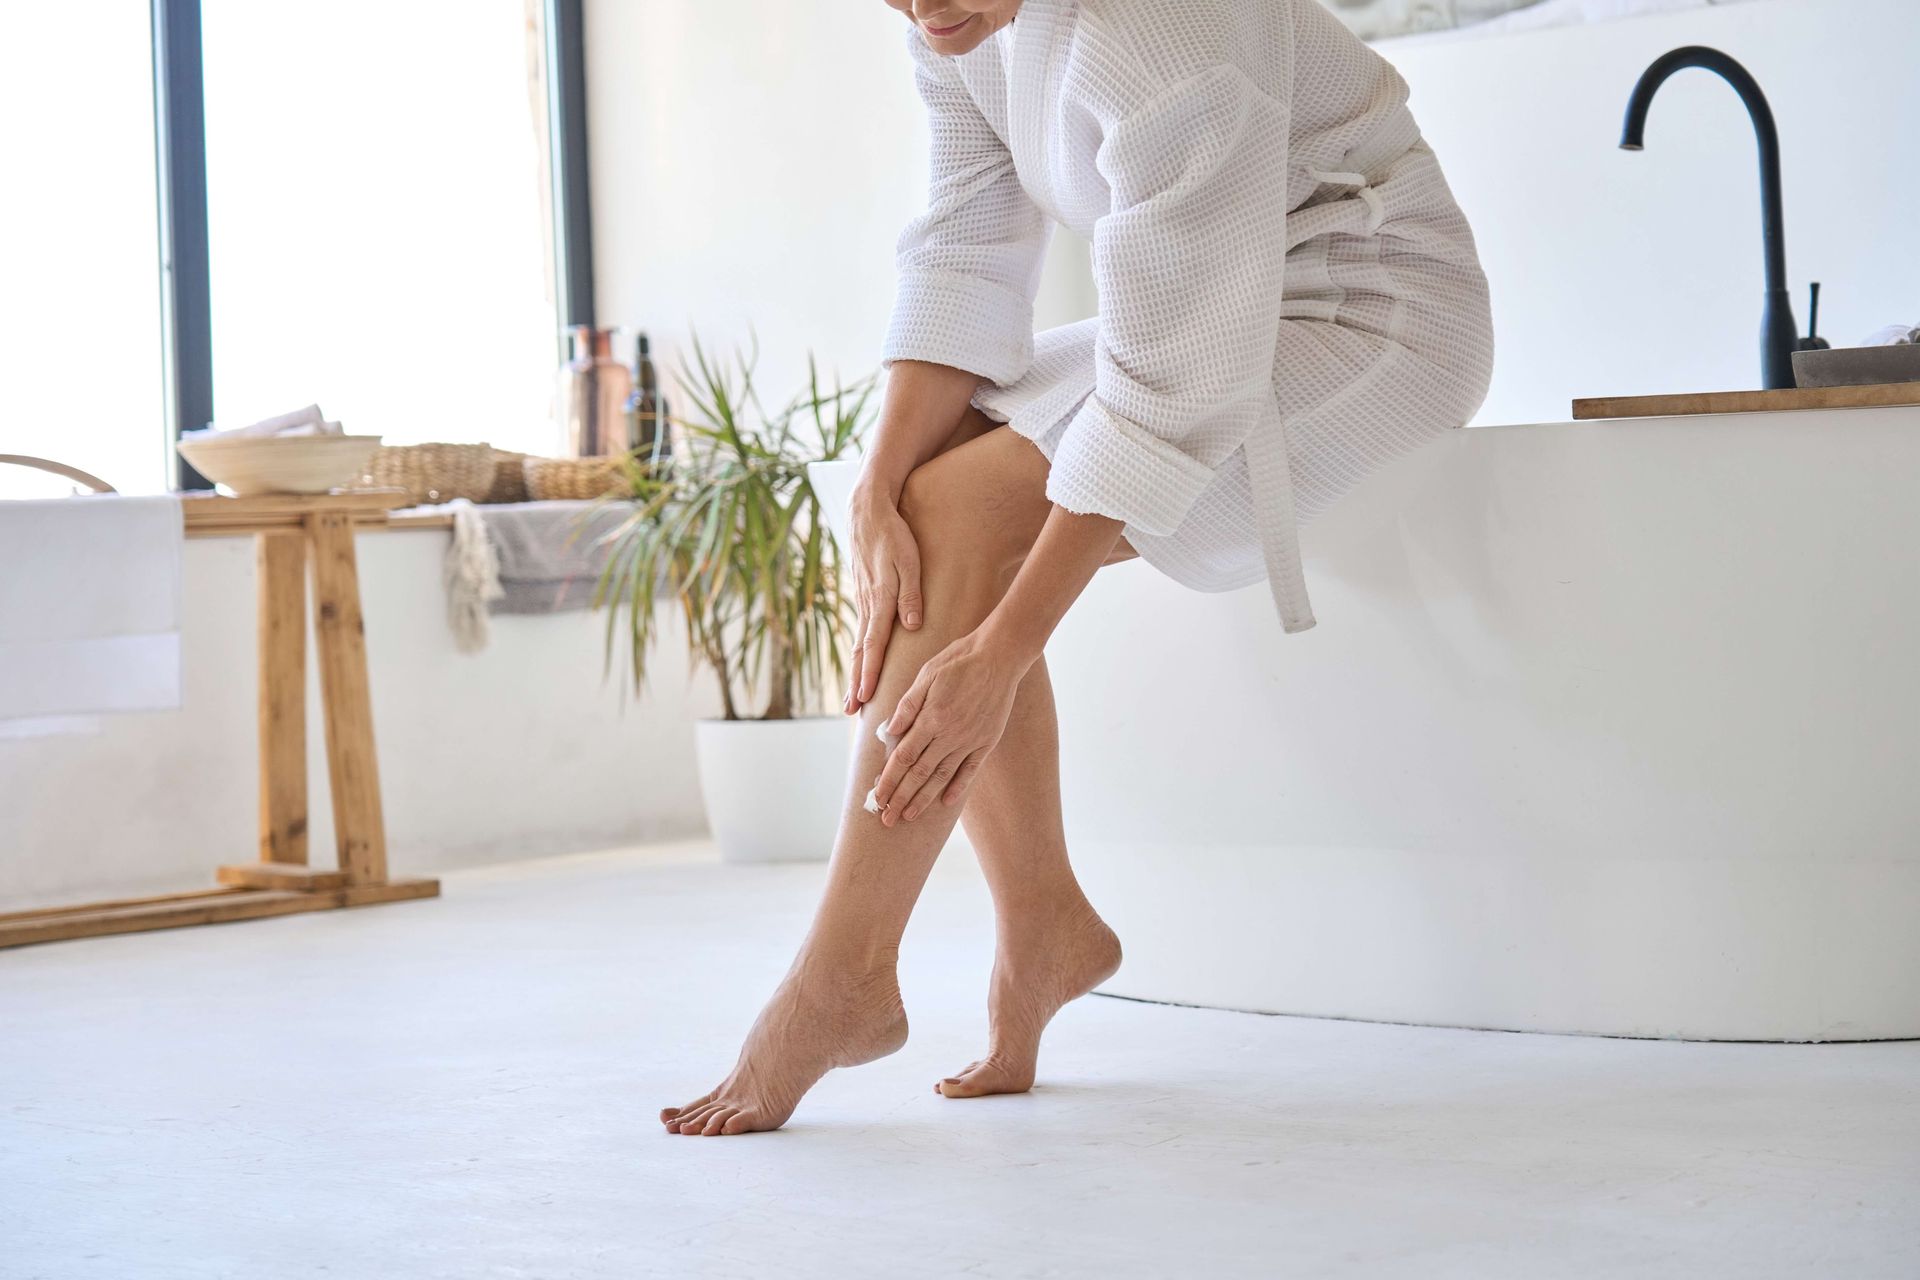 a woman in a bathrobe is sitting on a bathtub and applying lotion to her legs .